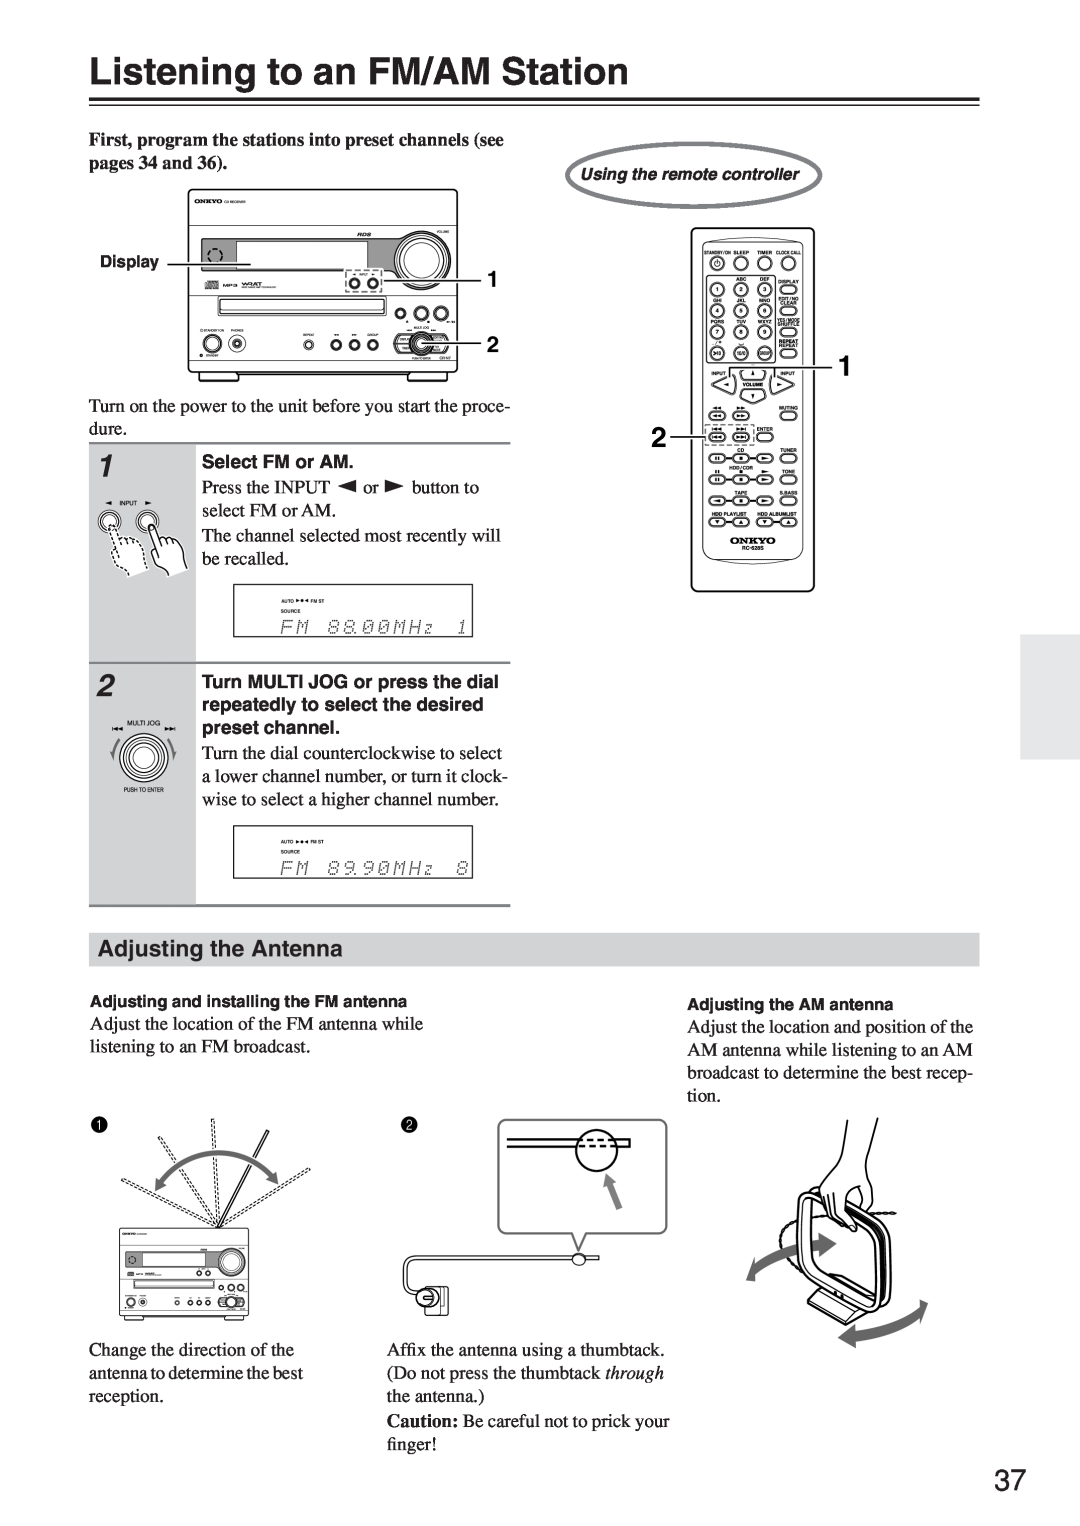 Onkyo CR-N7 instruction manual Listening to an FM/AM Station, Adjusting the Antenna 